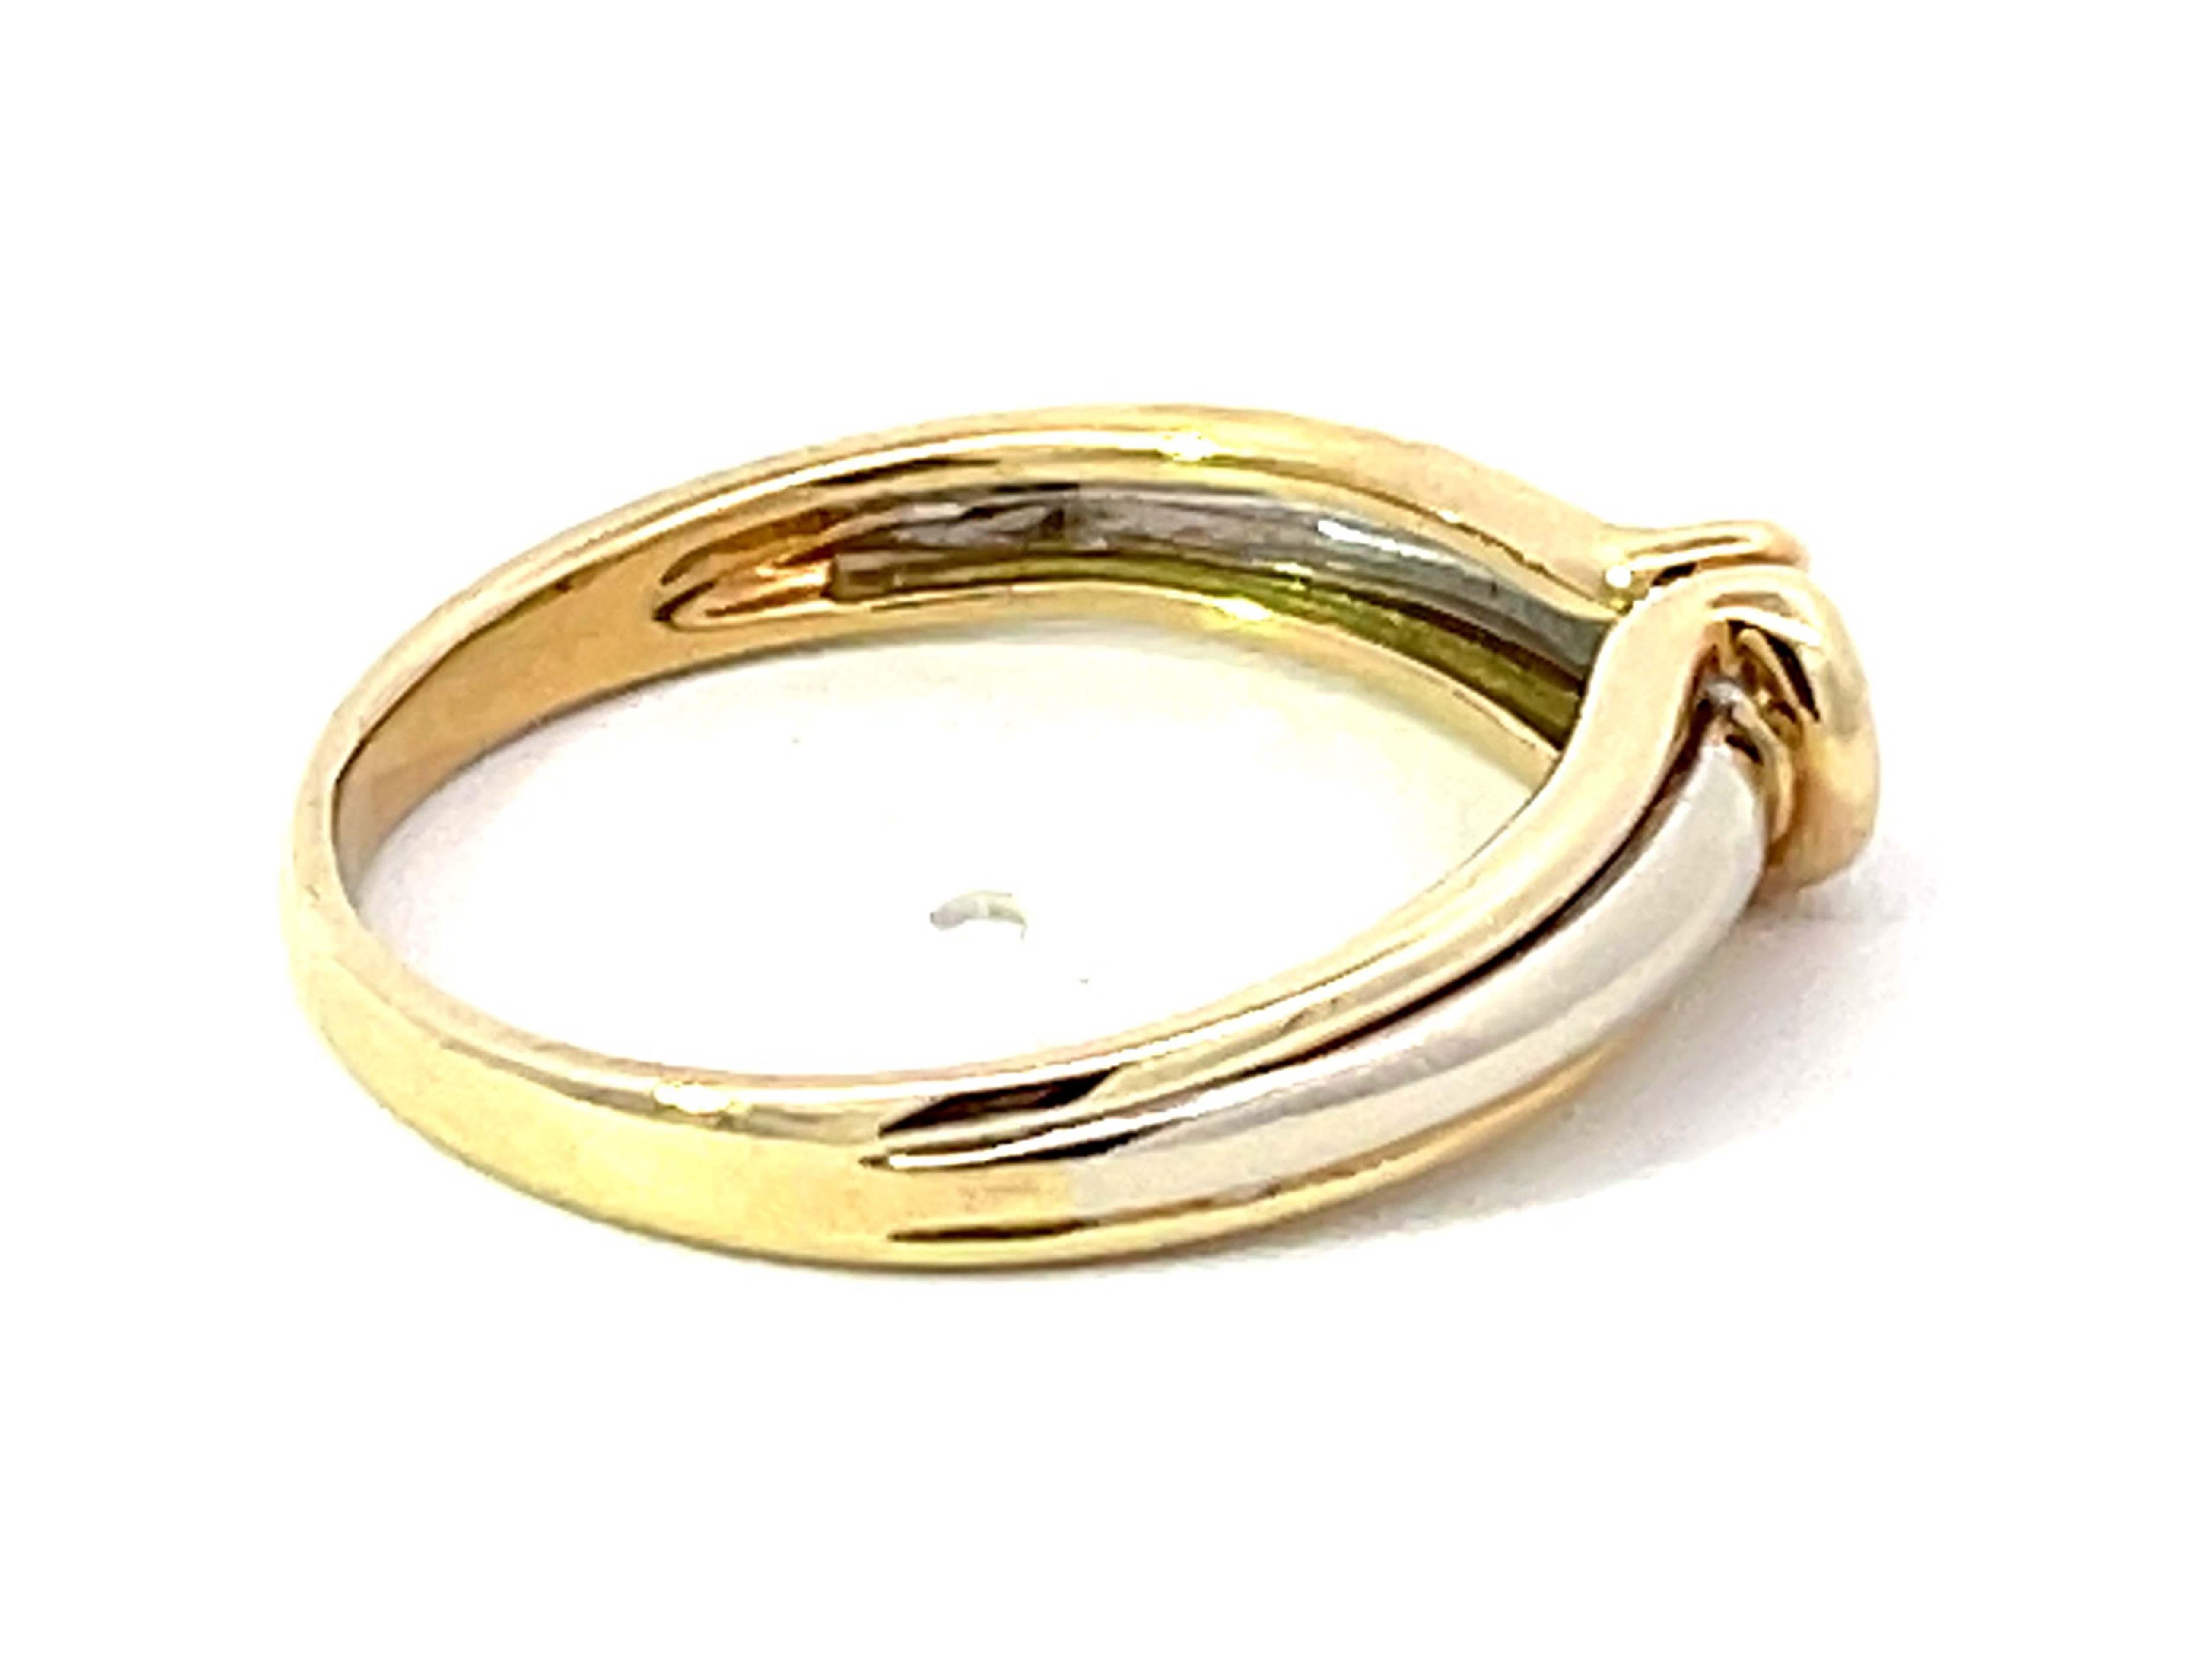 Solitaire Diamond Two Toned Ring in 14K Gold In Excellent Condition For Sale In Honolulu, HI